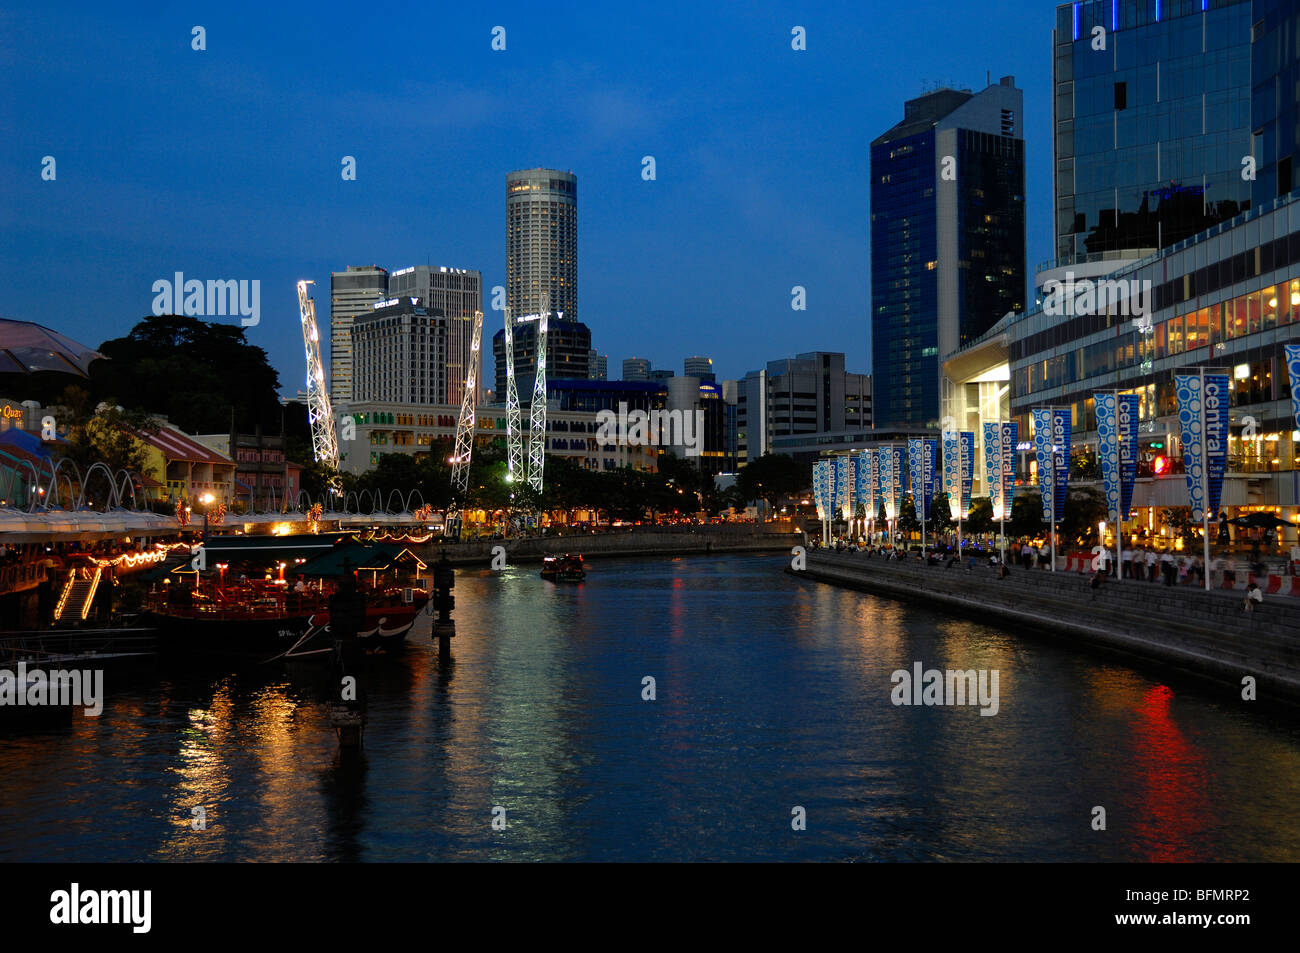 Townscape, Cityscape, and Skyline of Clarke Quay, Boat Quay and Singapore River at Dusk or Night, Singapore Stock Photo